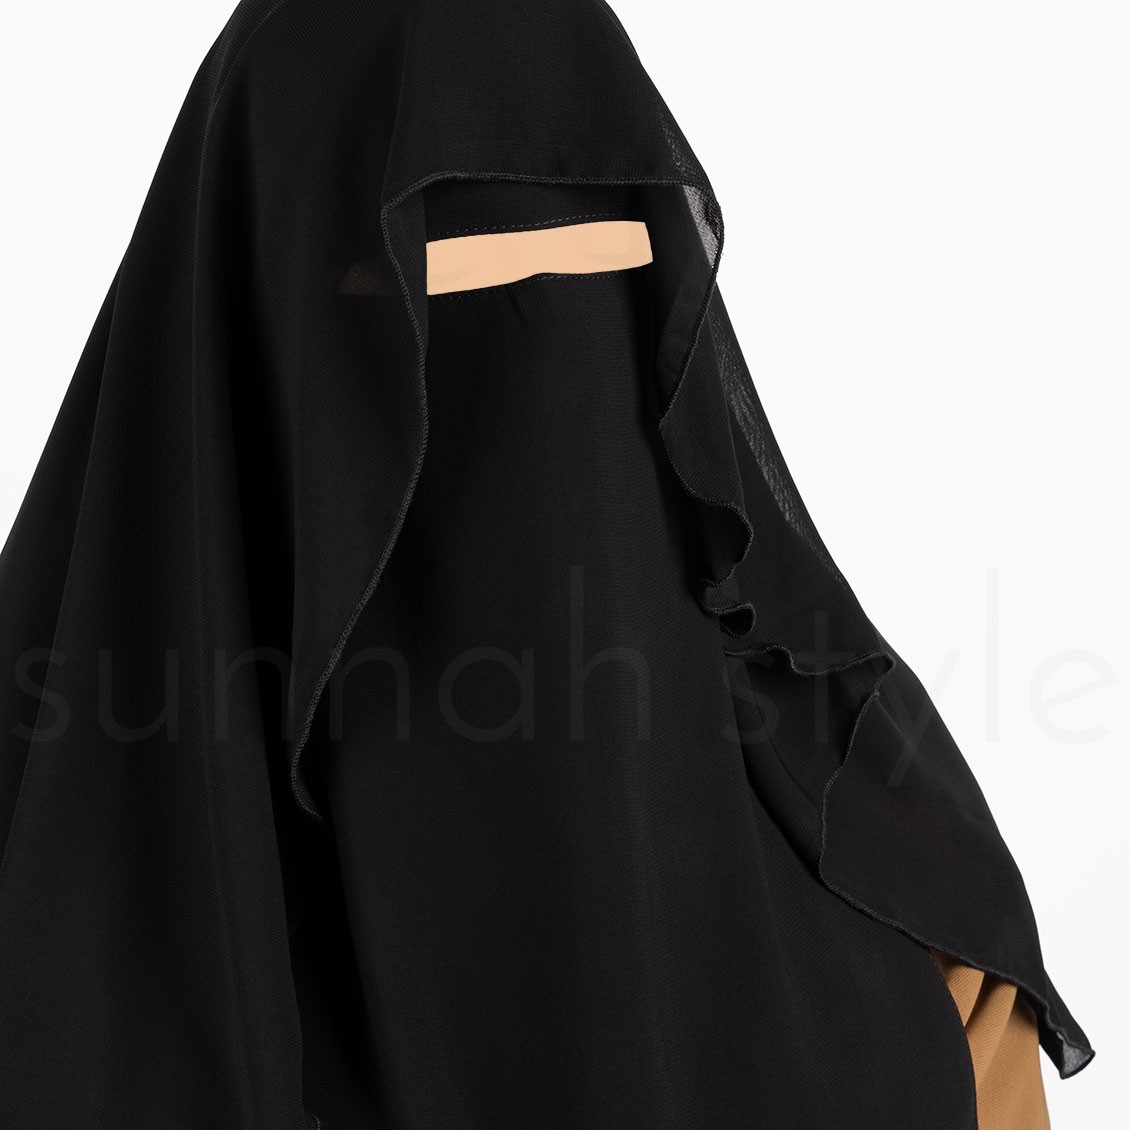 Sunnah Style Butterfly Niqab Black